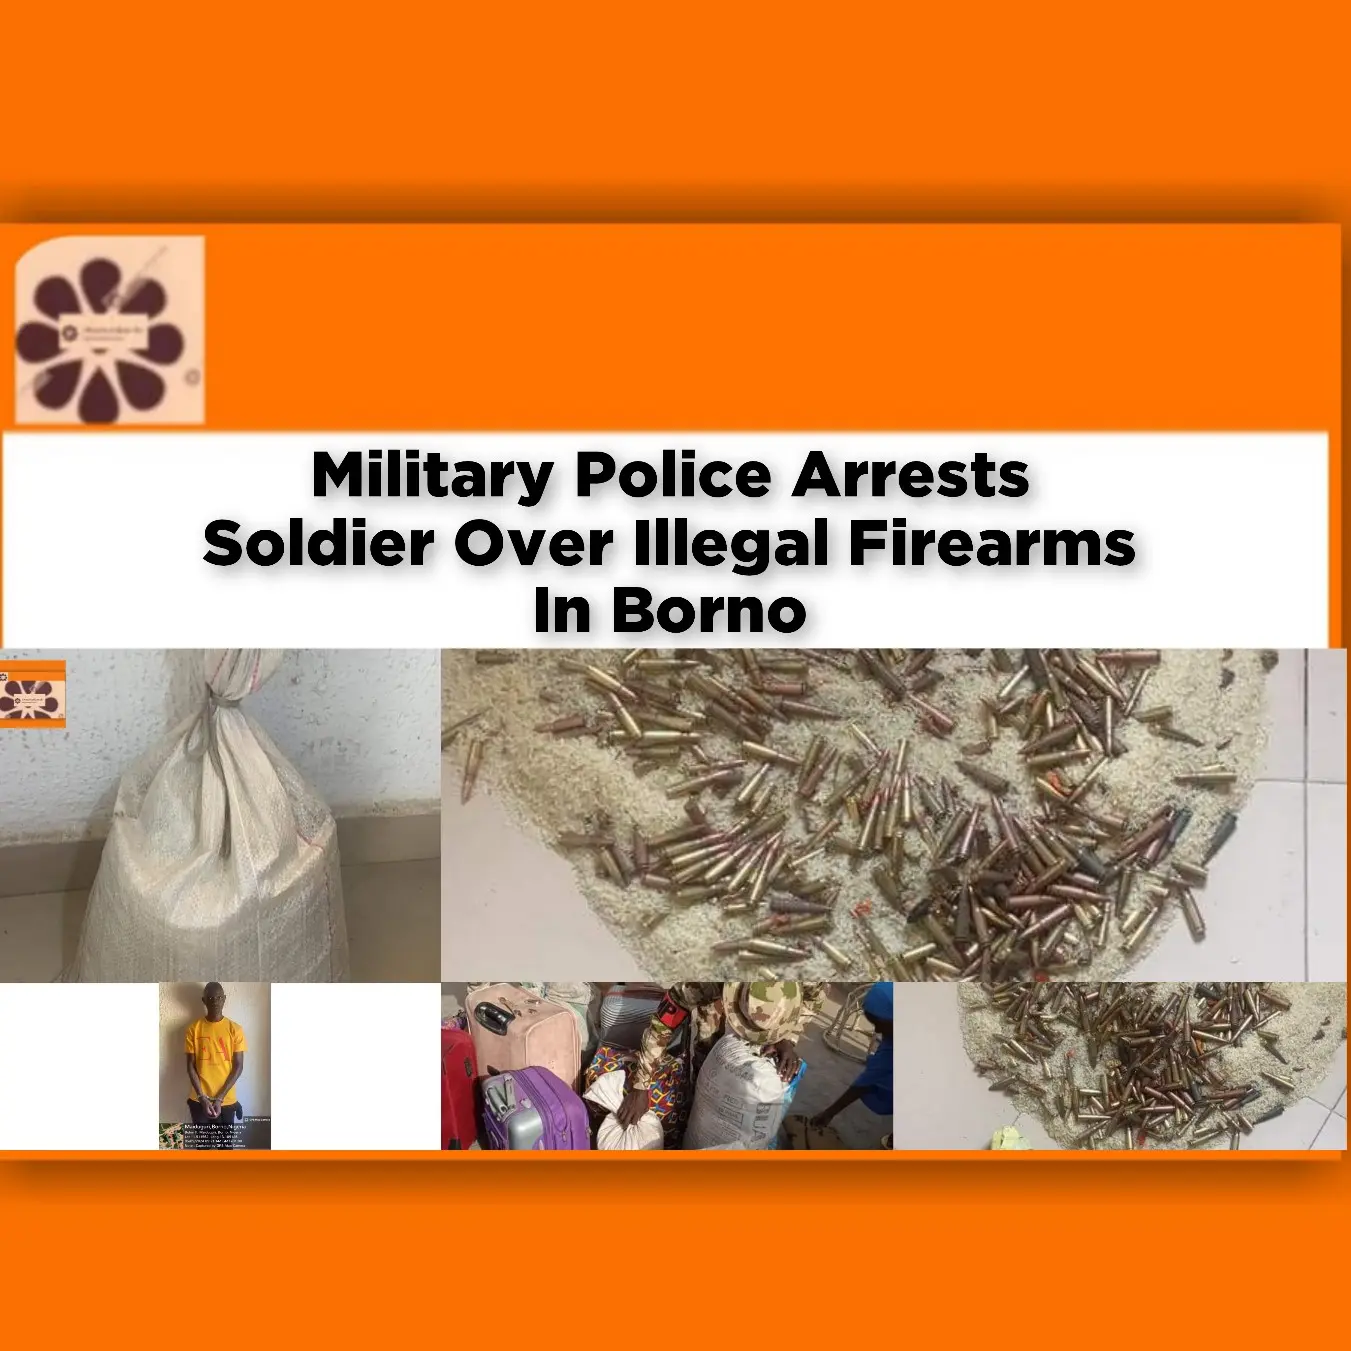 Military Police Arrests Soldier Over Illegal Firearms In Borno ~ OsazuwaAkonedo #Shell